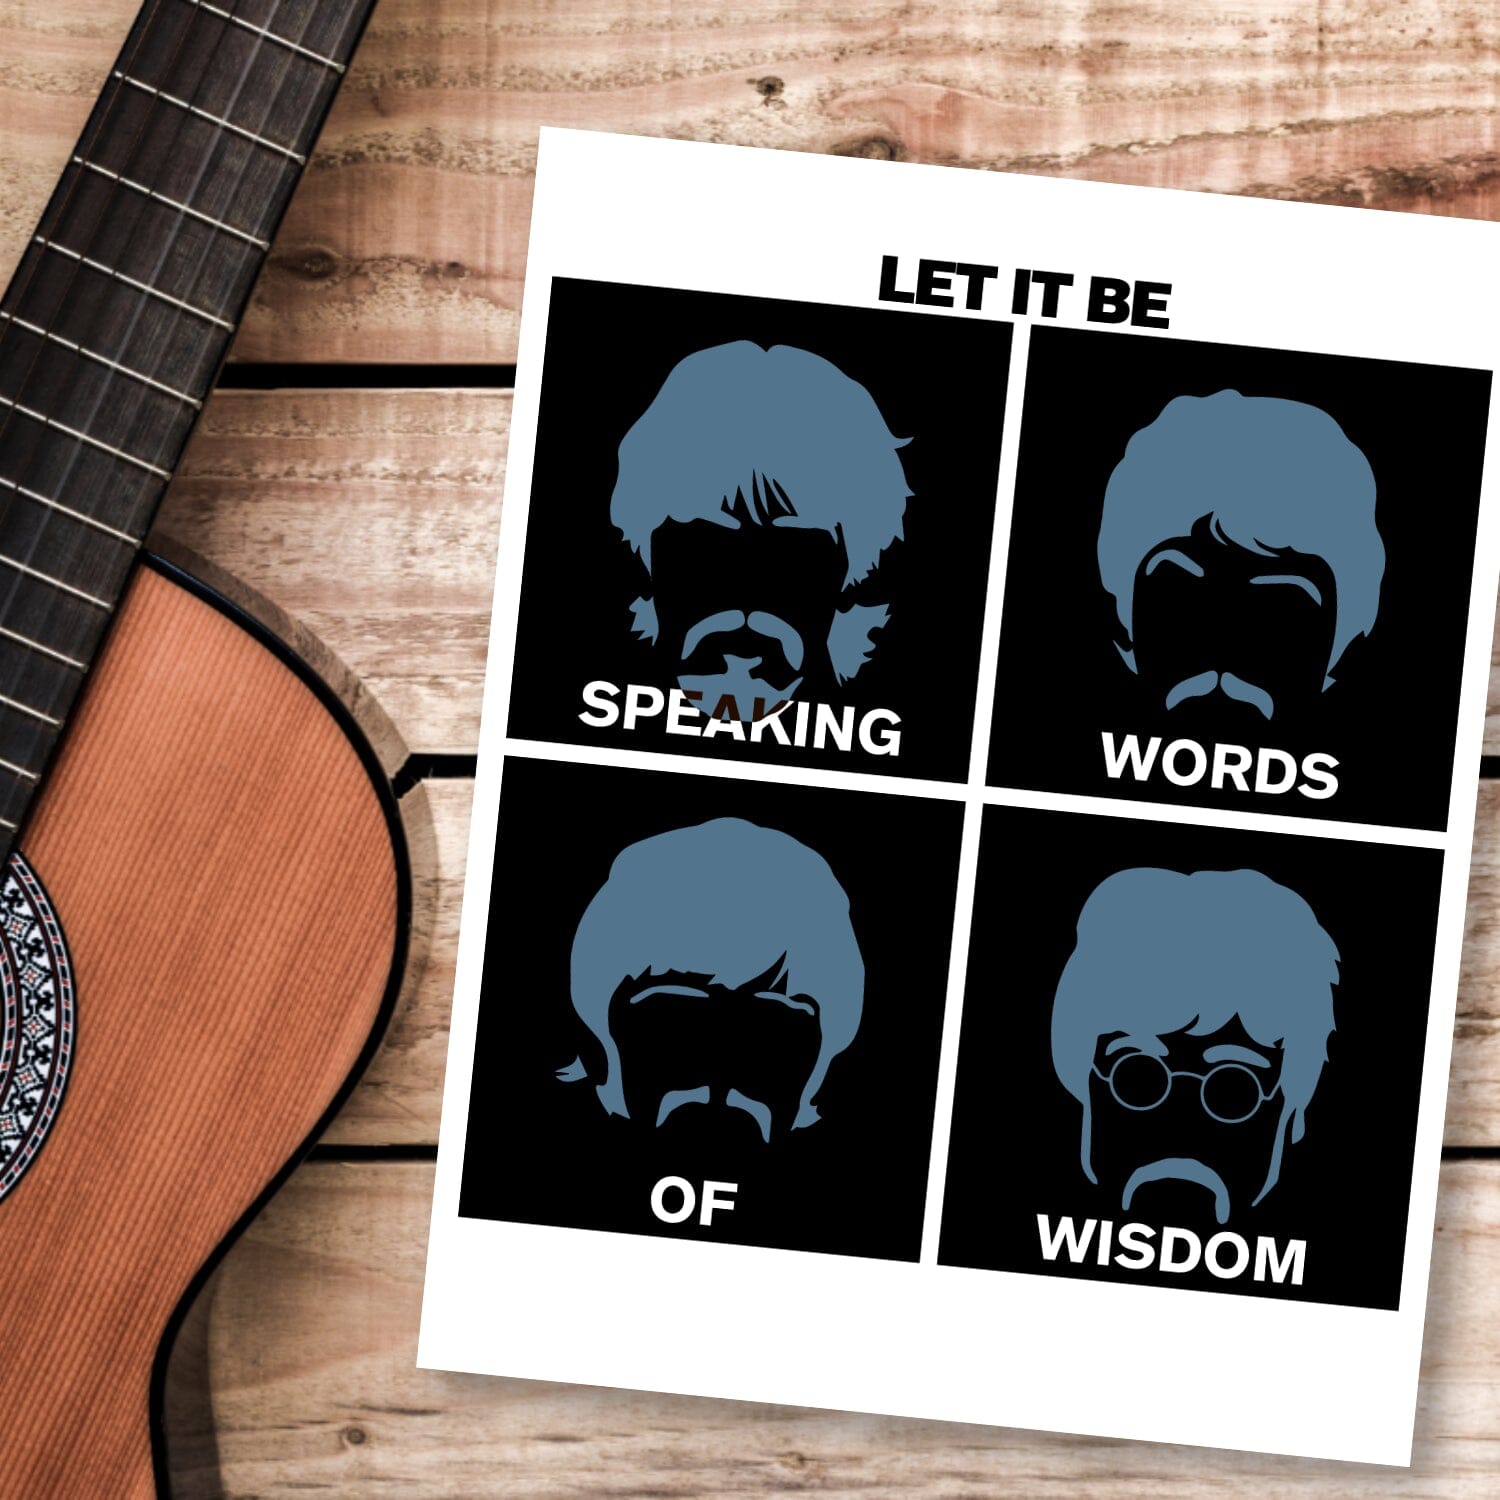 Let it Be by the Beatles - Song Lyric Inspired Wall Decor Song Lyrics Art Song Lyrics Art 8x10 unframed Print 